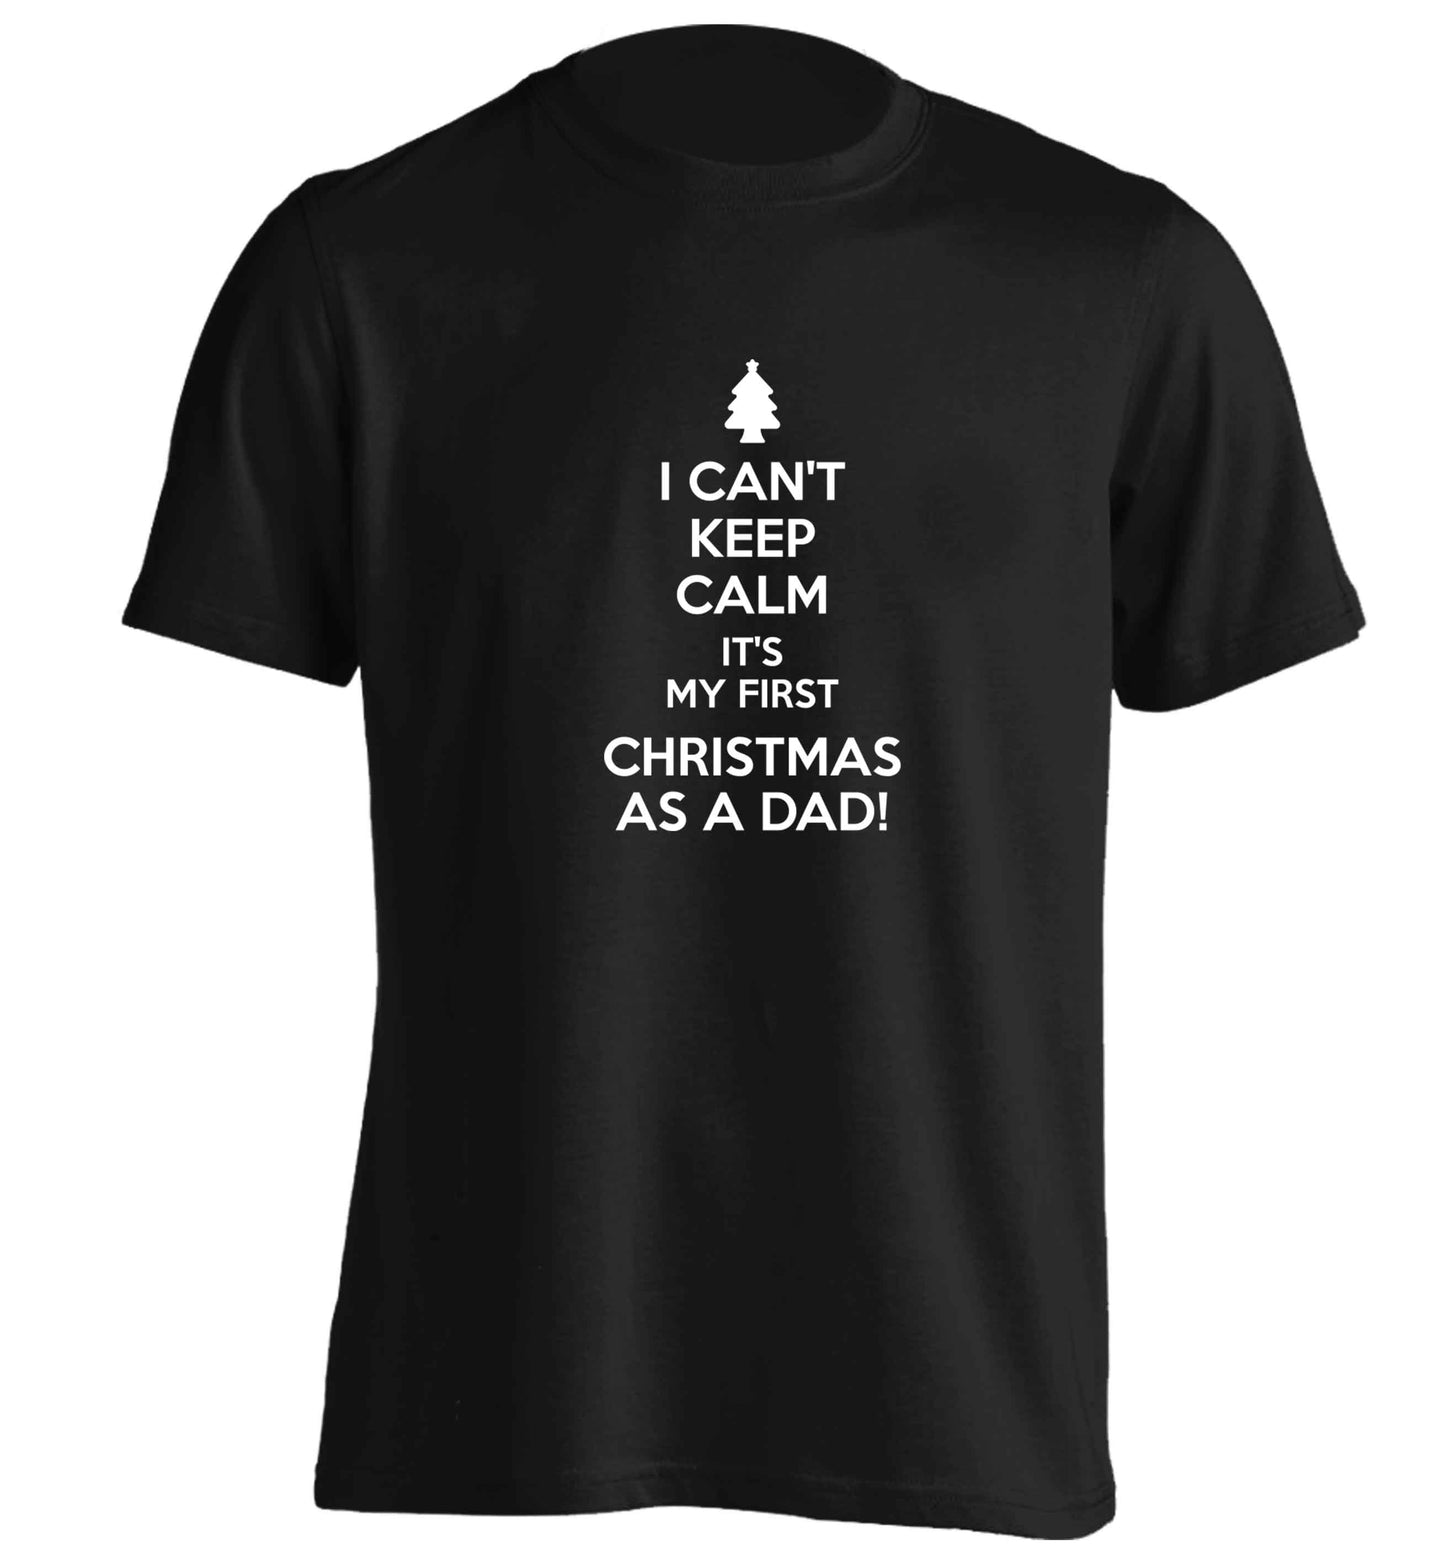 I can't keep calm it's my first Christmas as a dad adults unisex black Tshirt 2XL